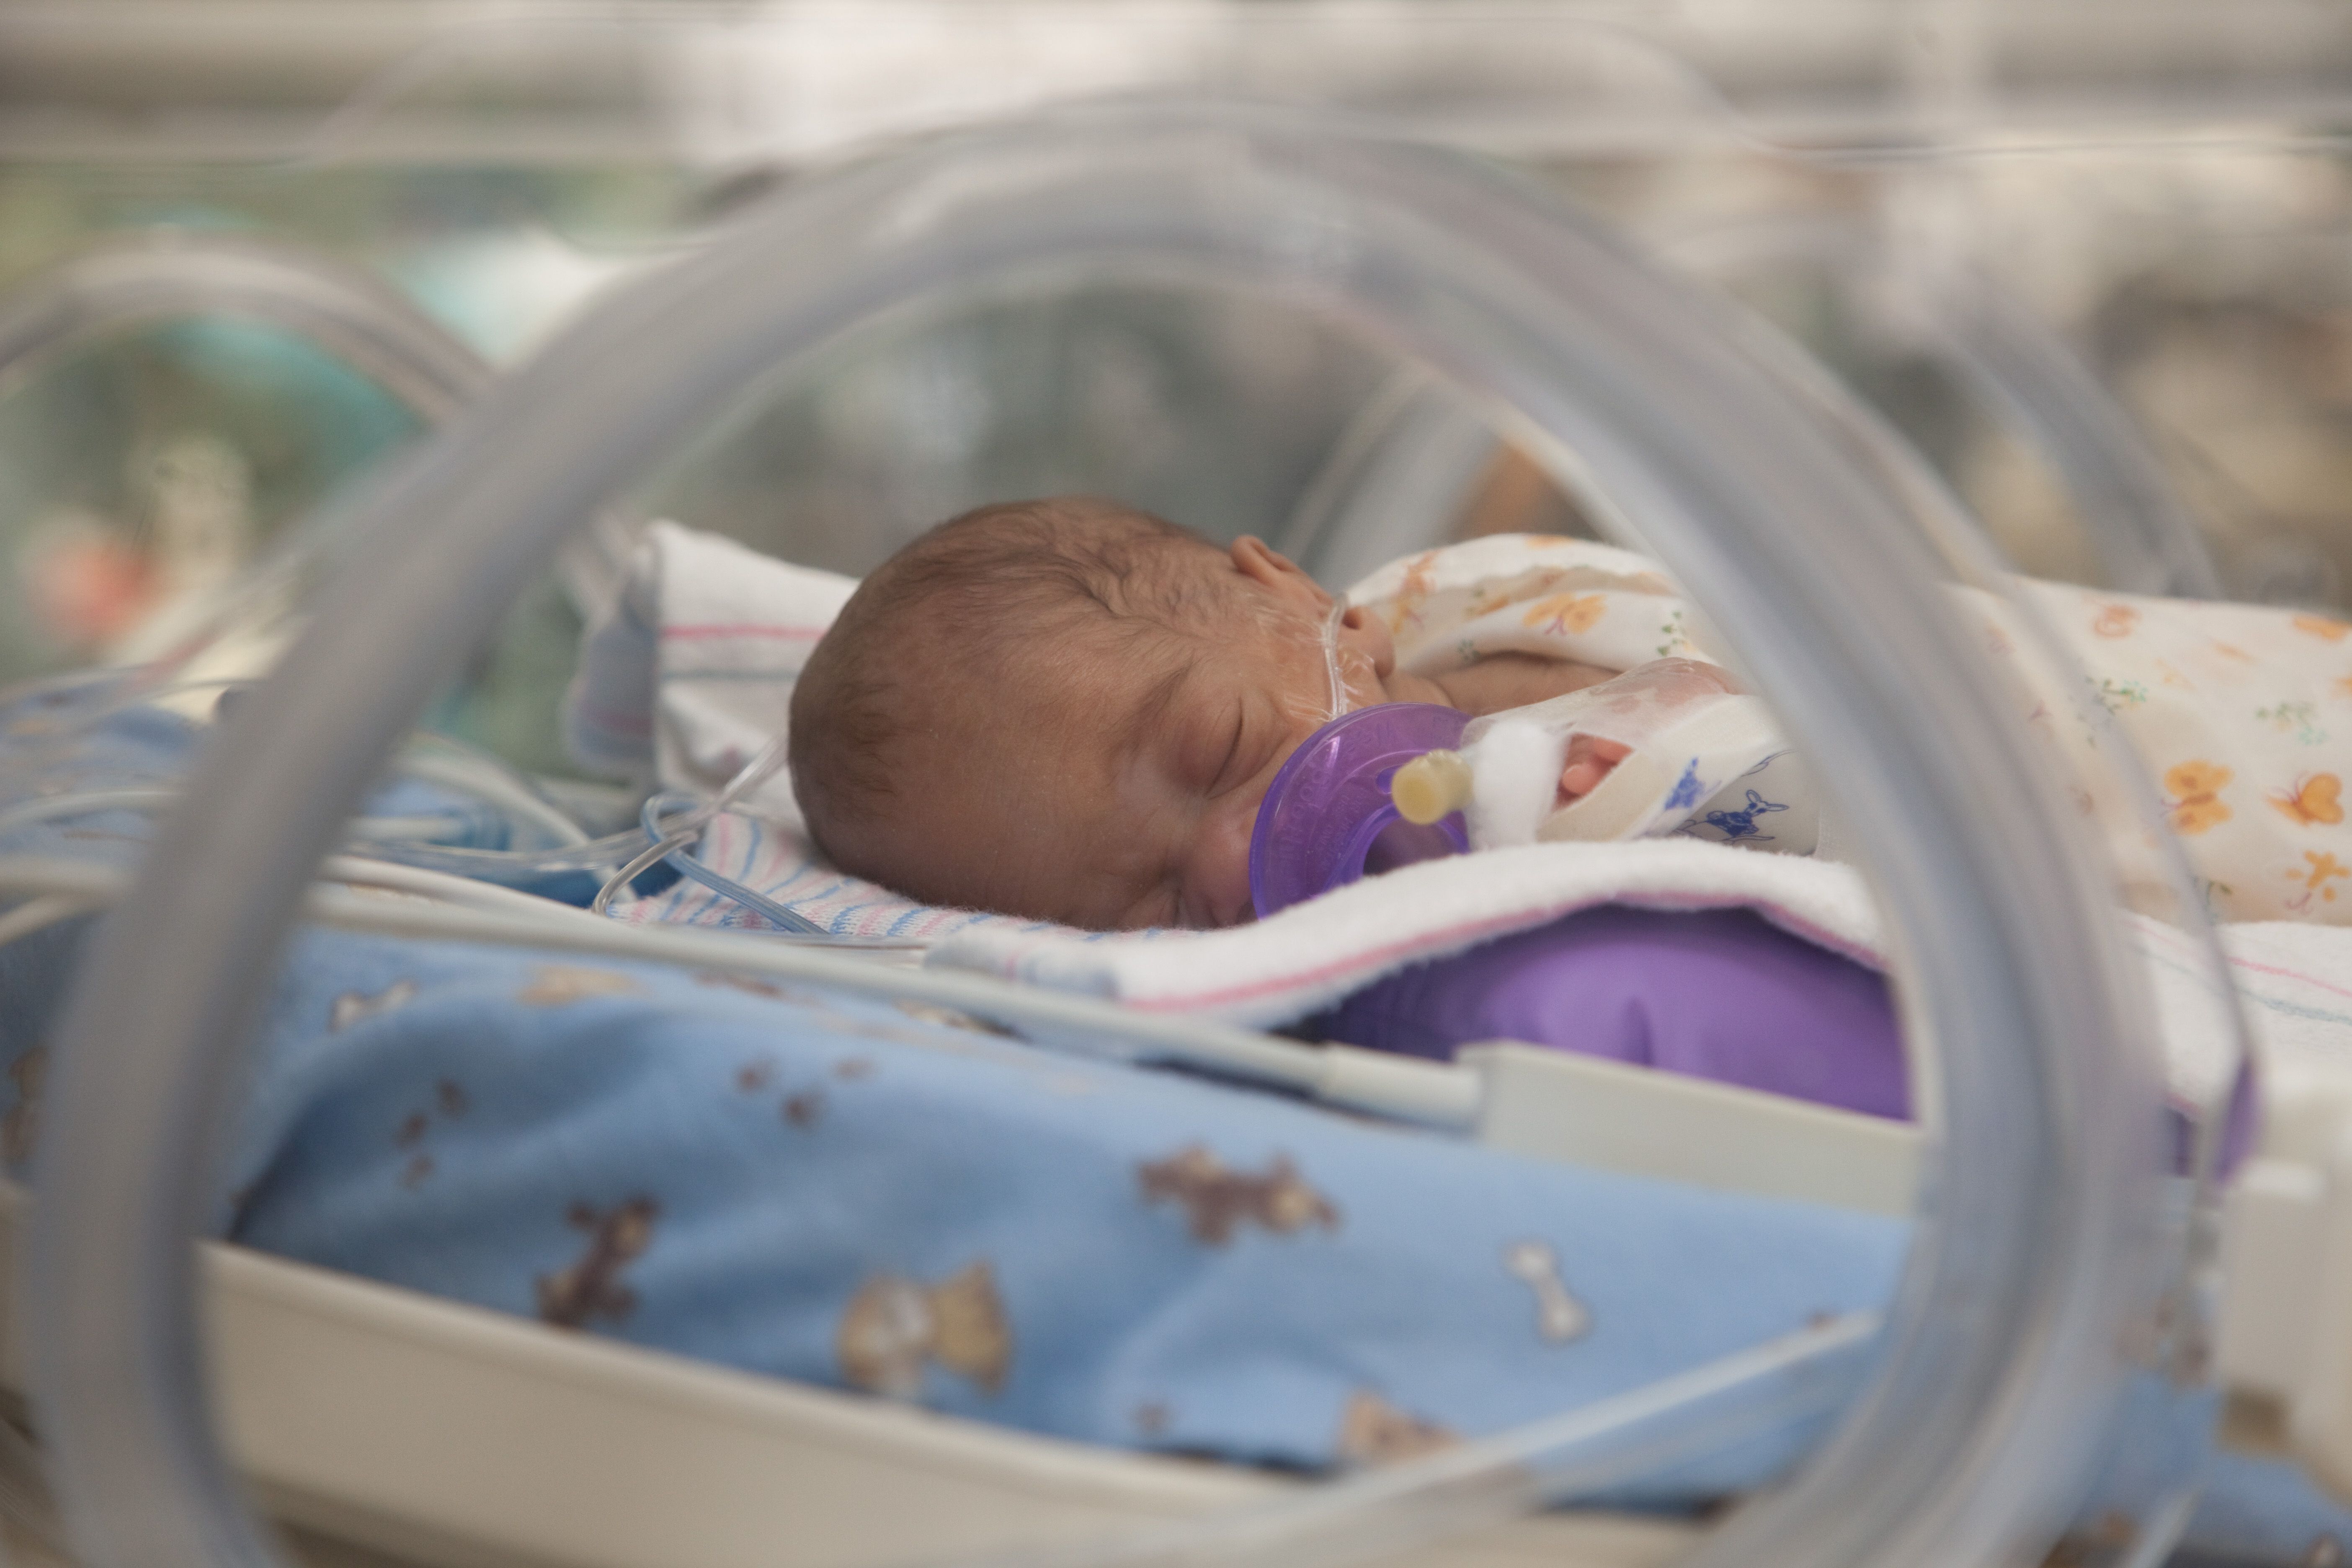 Interview: CDC's Report About Donor Milk Use in the NICU